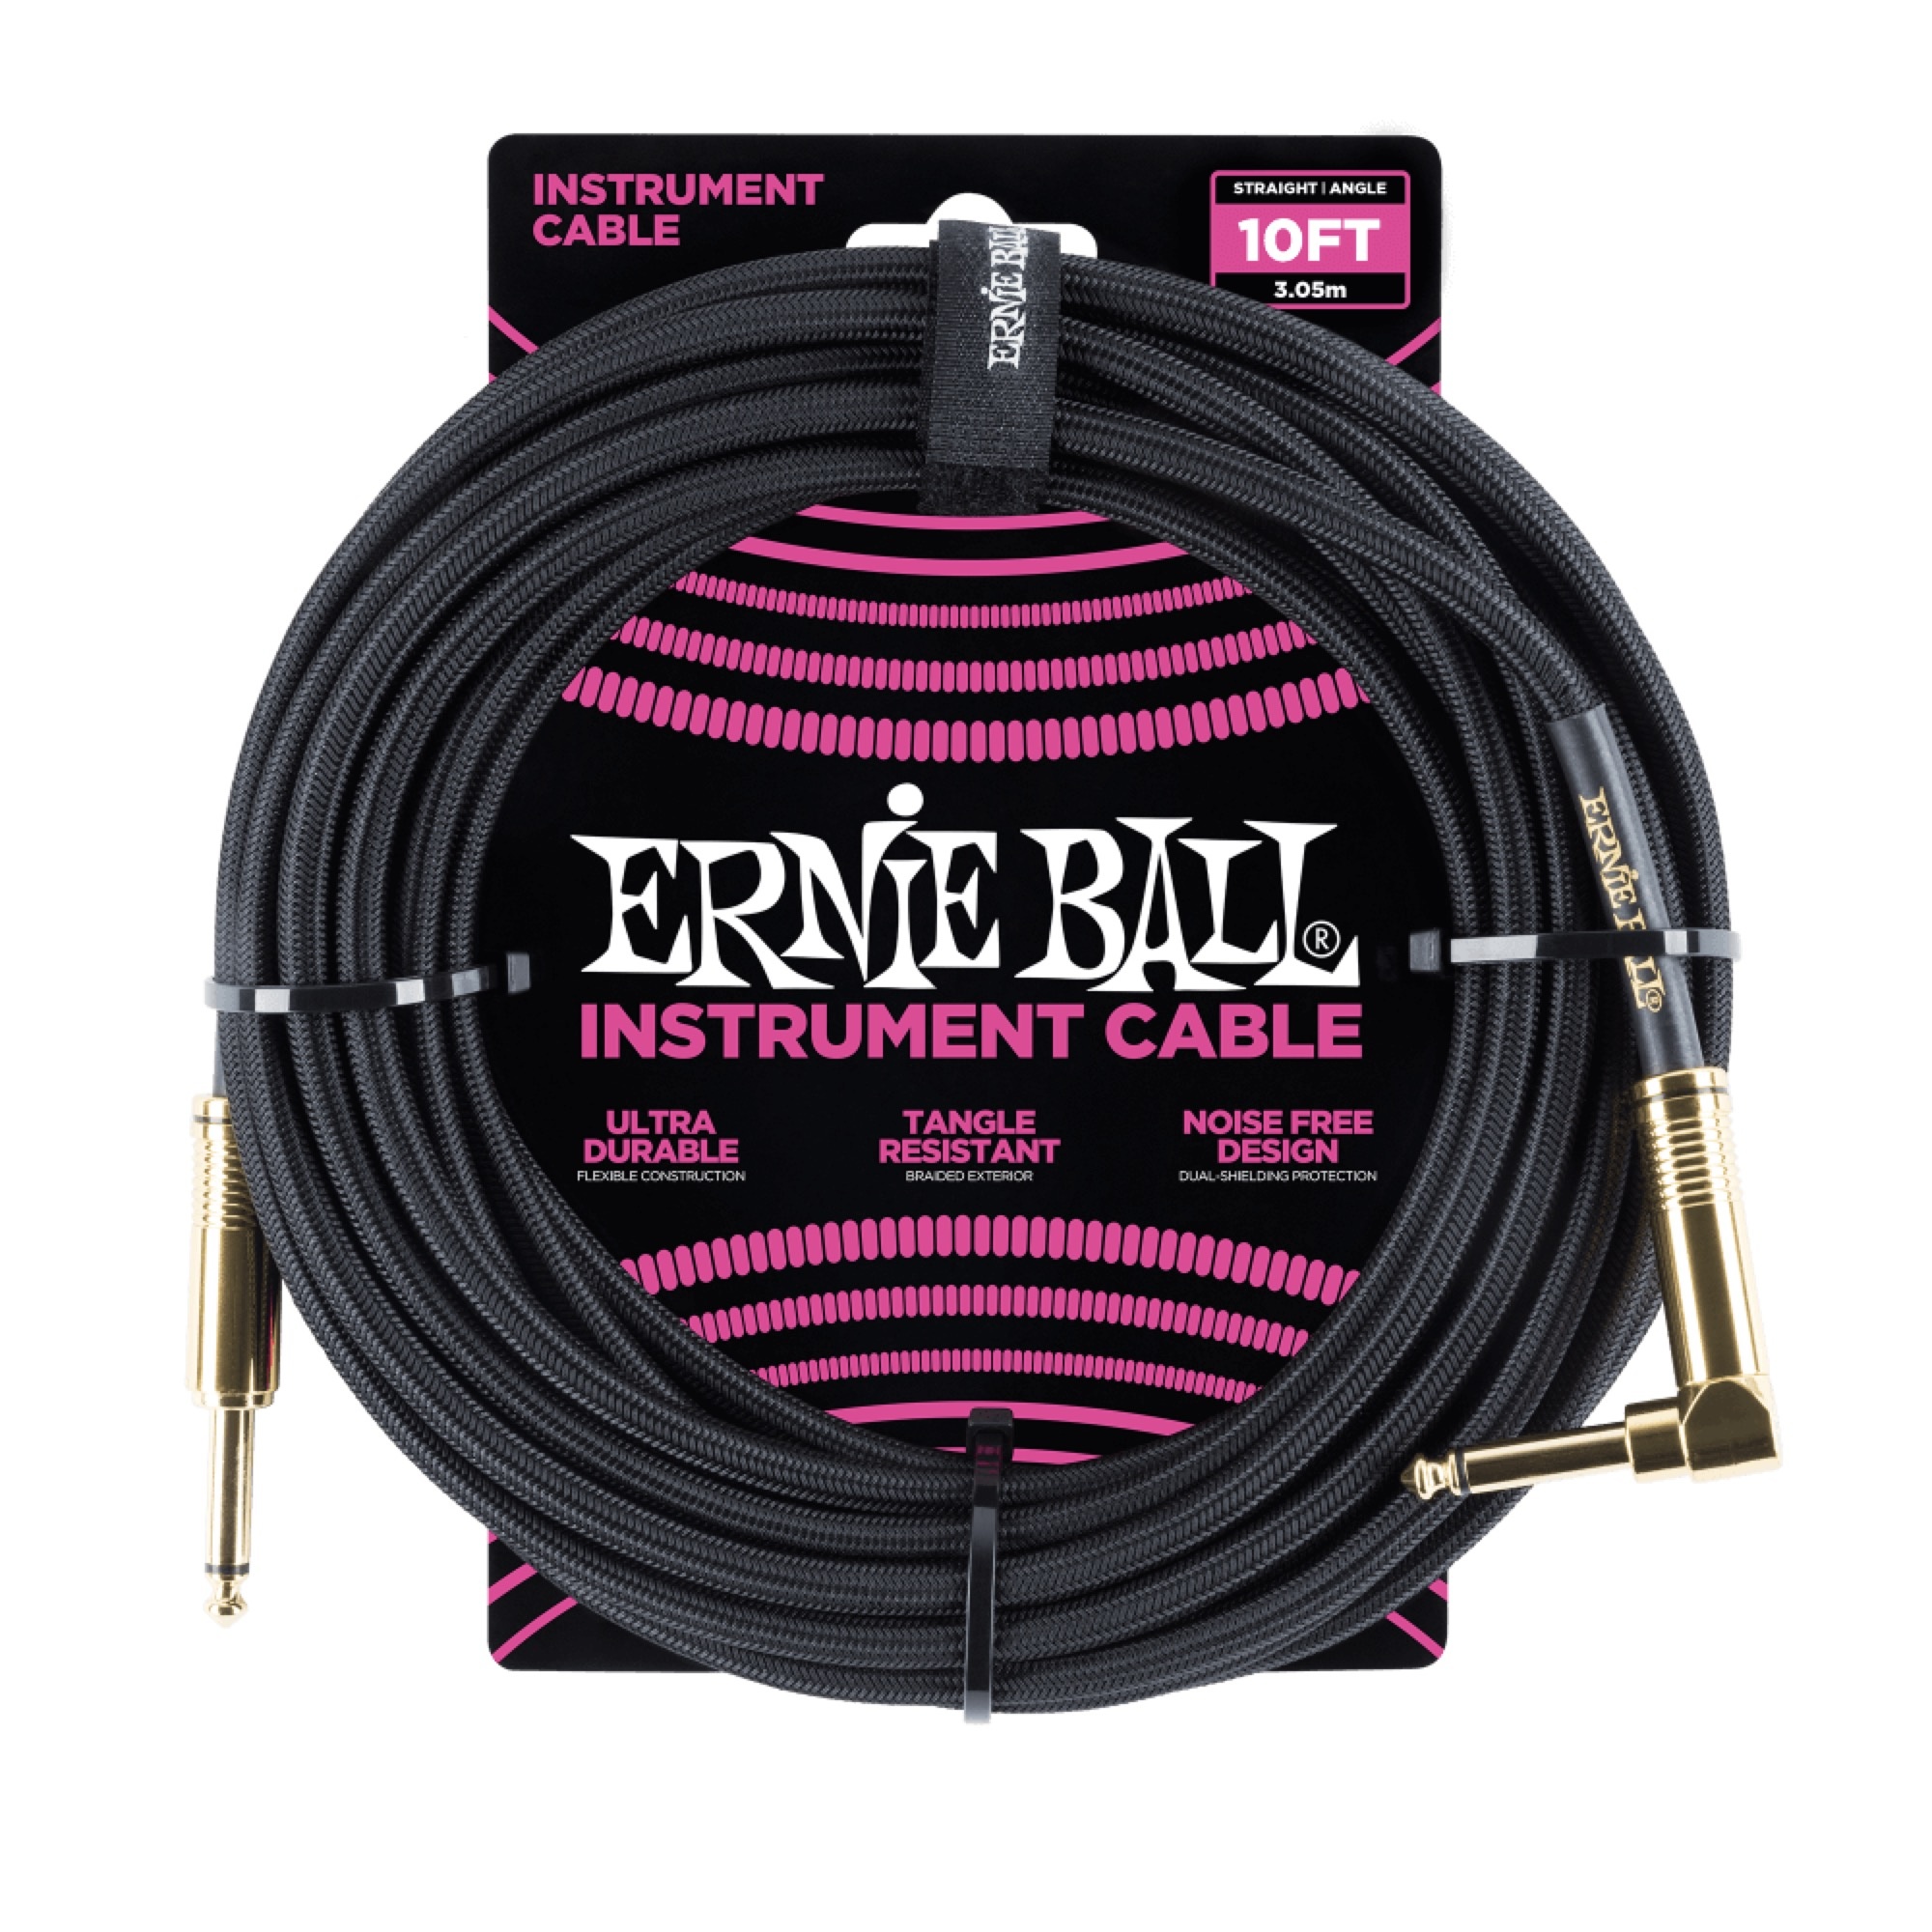 Ernie Ball 10' Braided Straight / Angle Instrument Cable Black w/Gold Connectors